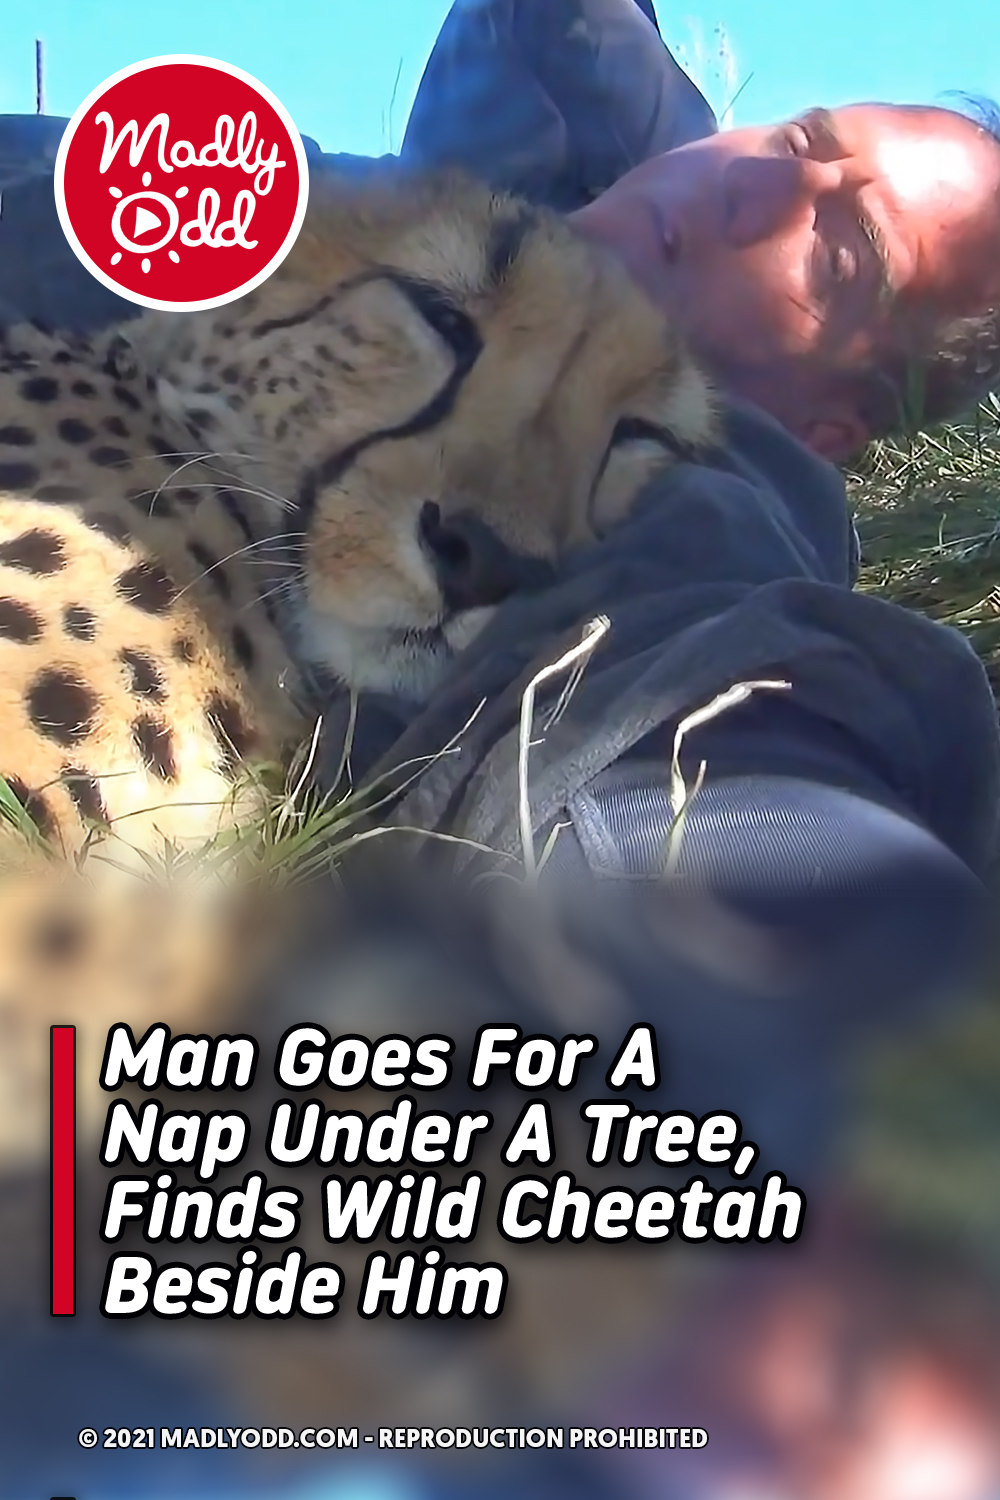 Man Goes For A Nap Under A Tree, Finds Wild Cheetah Beside Him